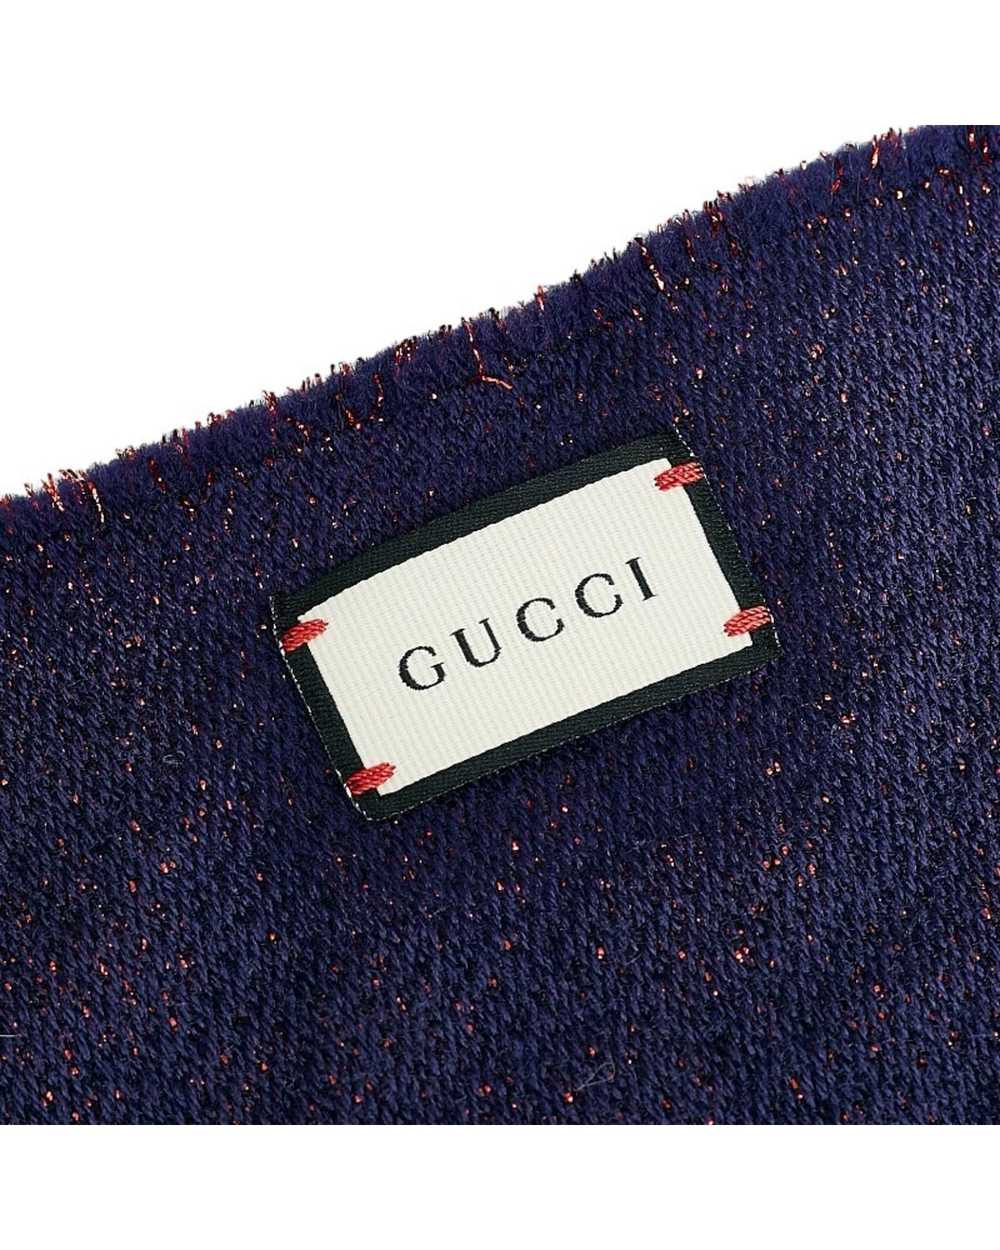 Gucci Navy and Red Wool-Silk Stole - image 4